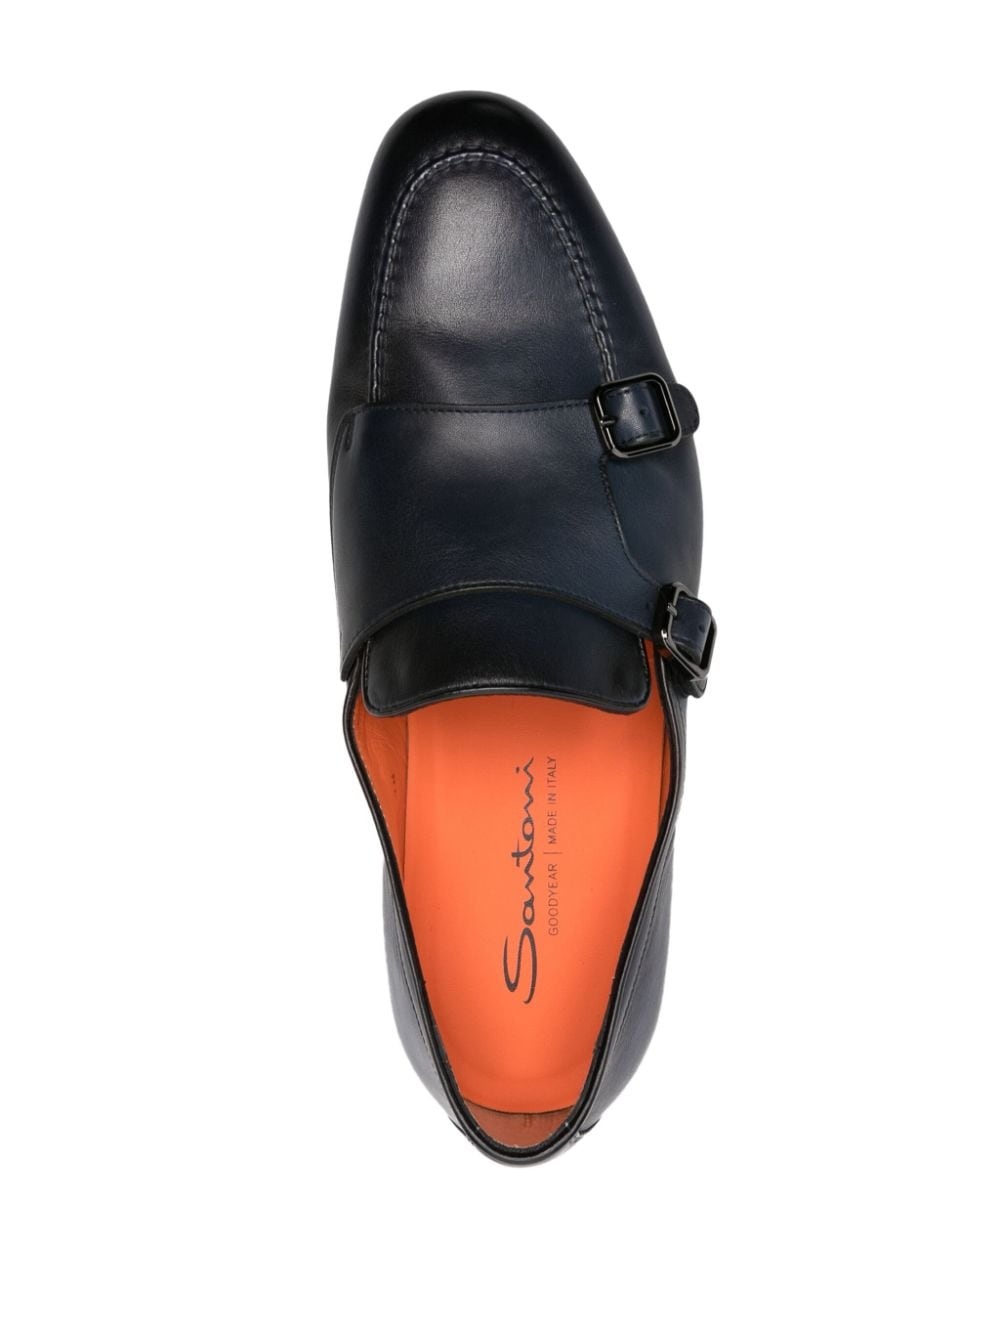 double-buckle leather monk shoes - 4